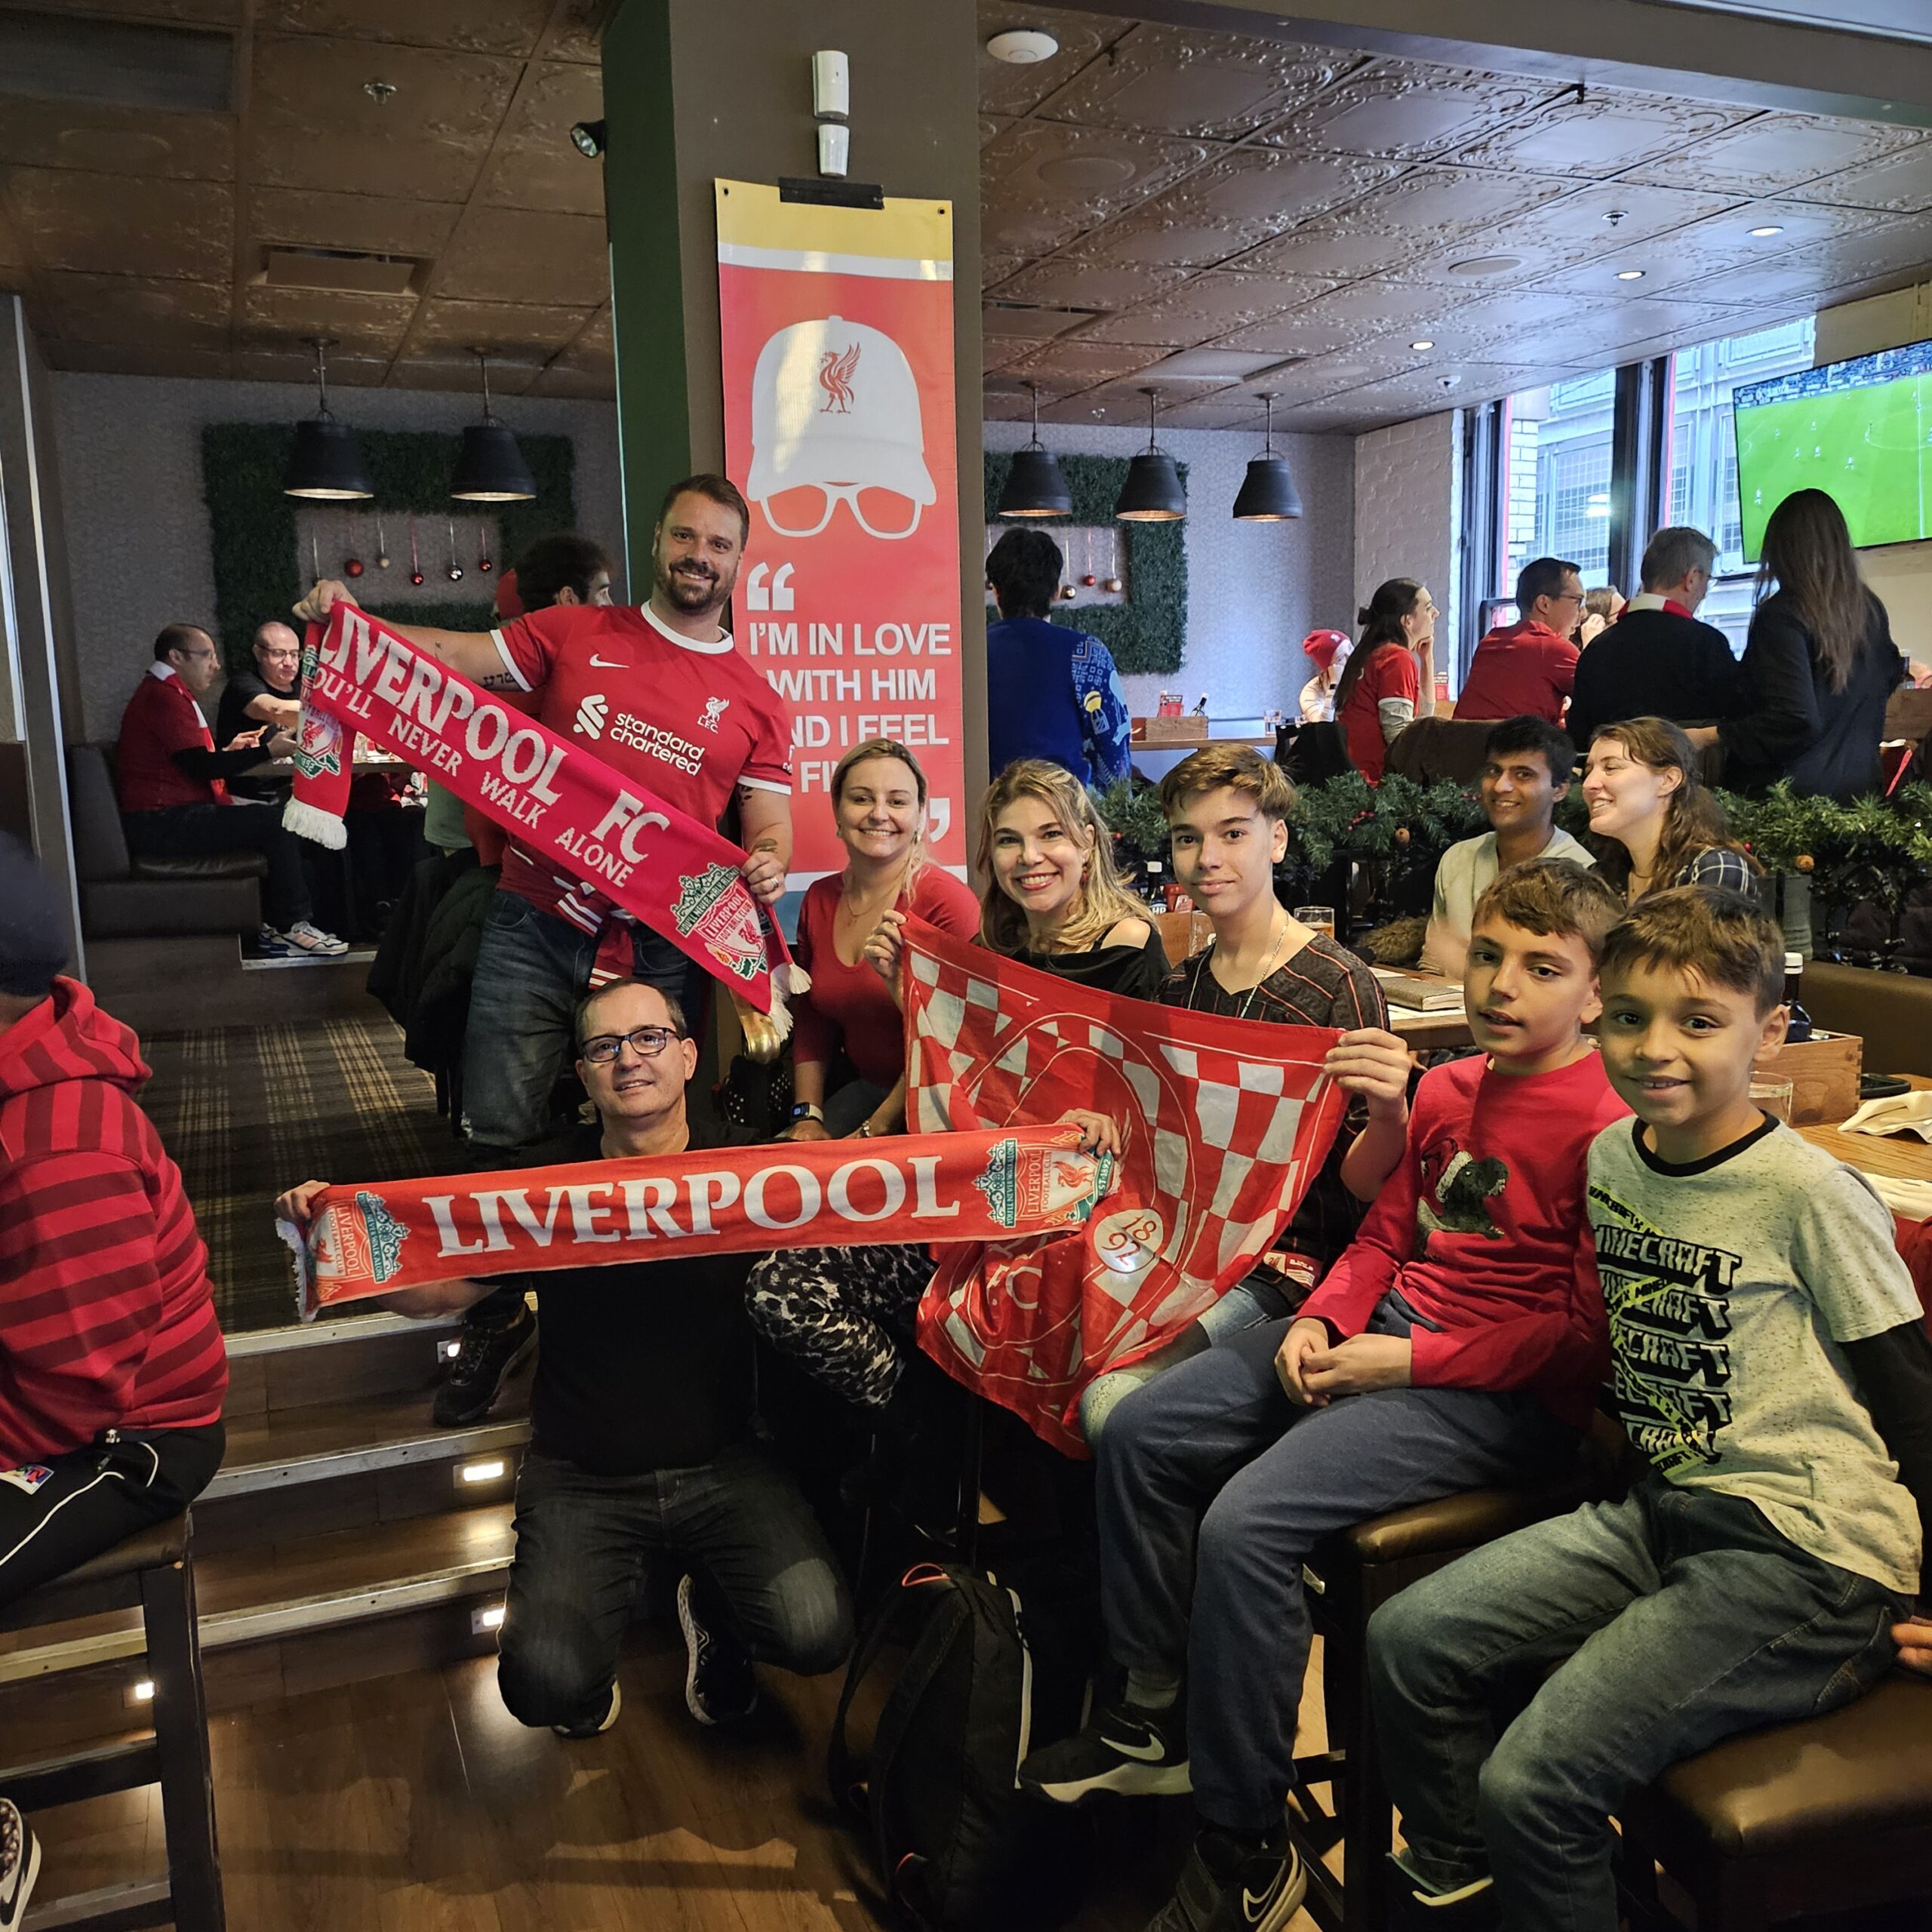 Fans from South America visiting Liverpool FC Fan club in Toronto - Elephant & Castle Pub